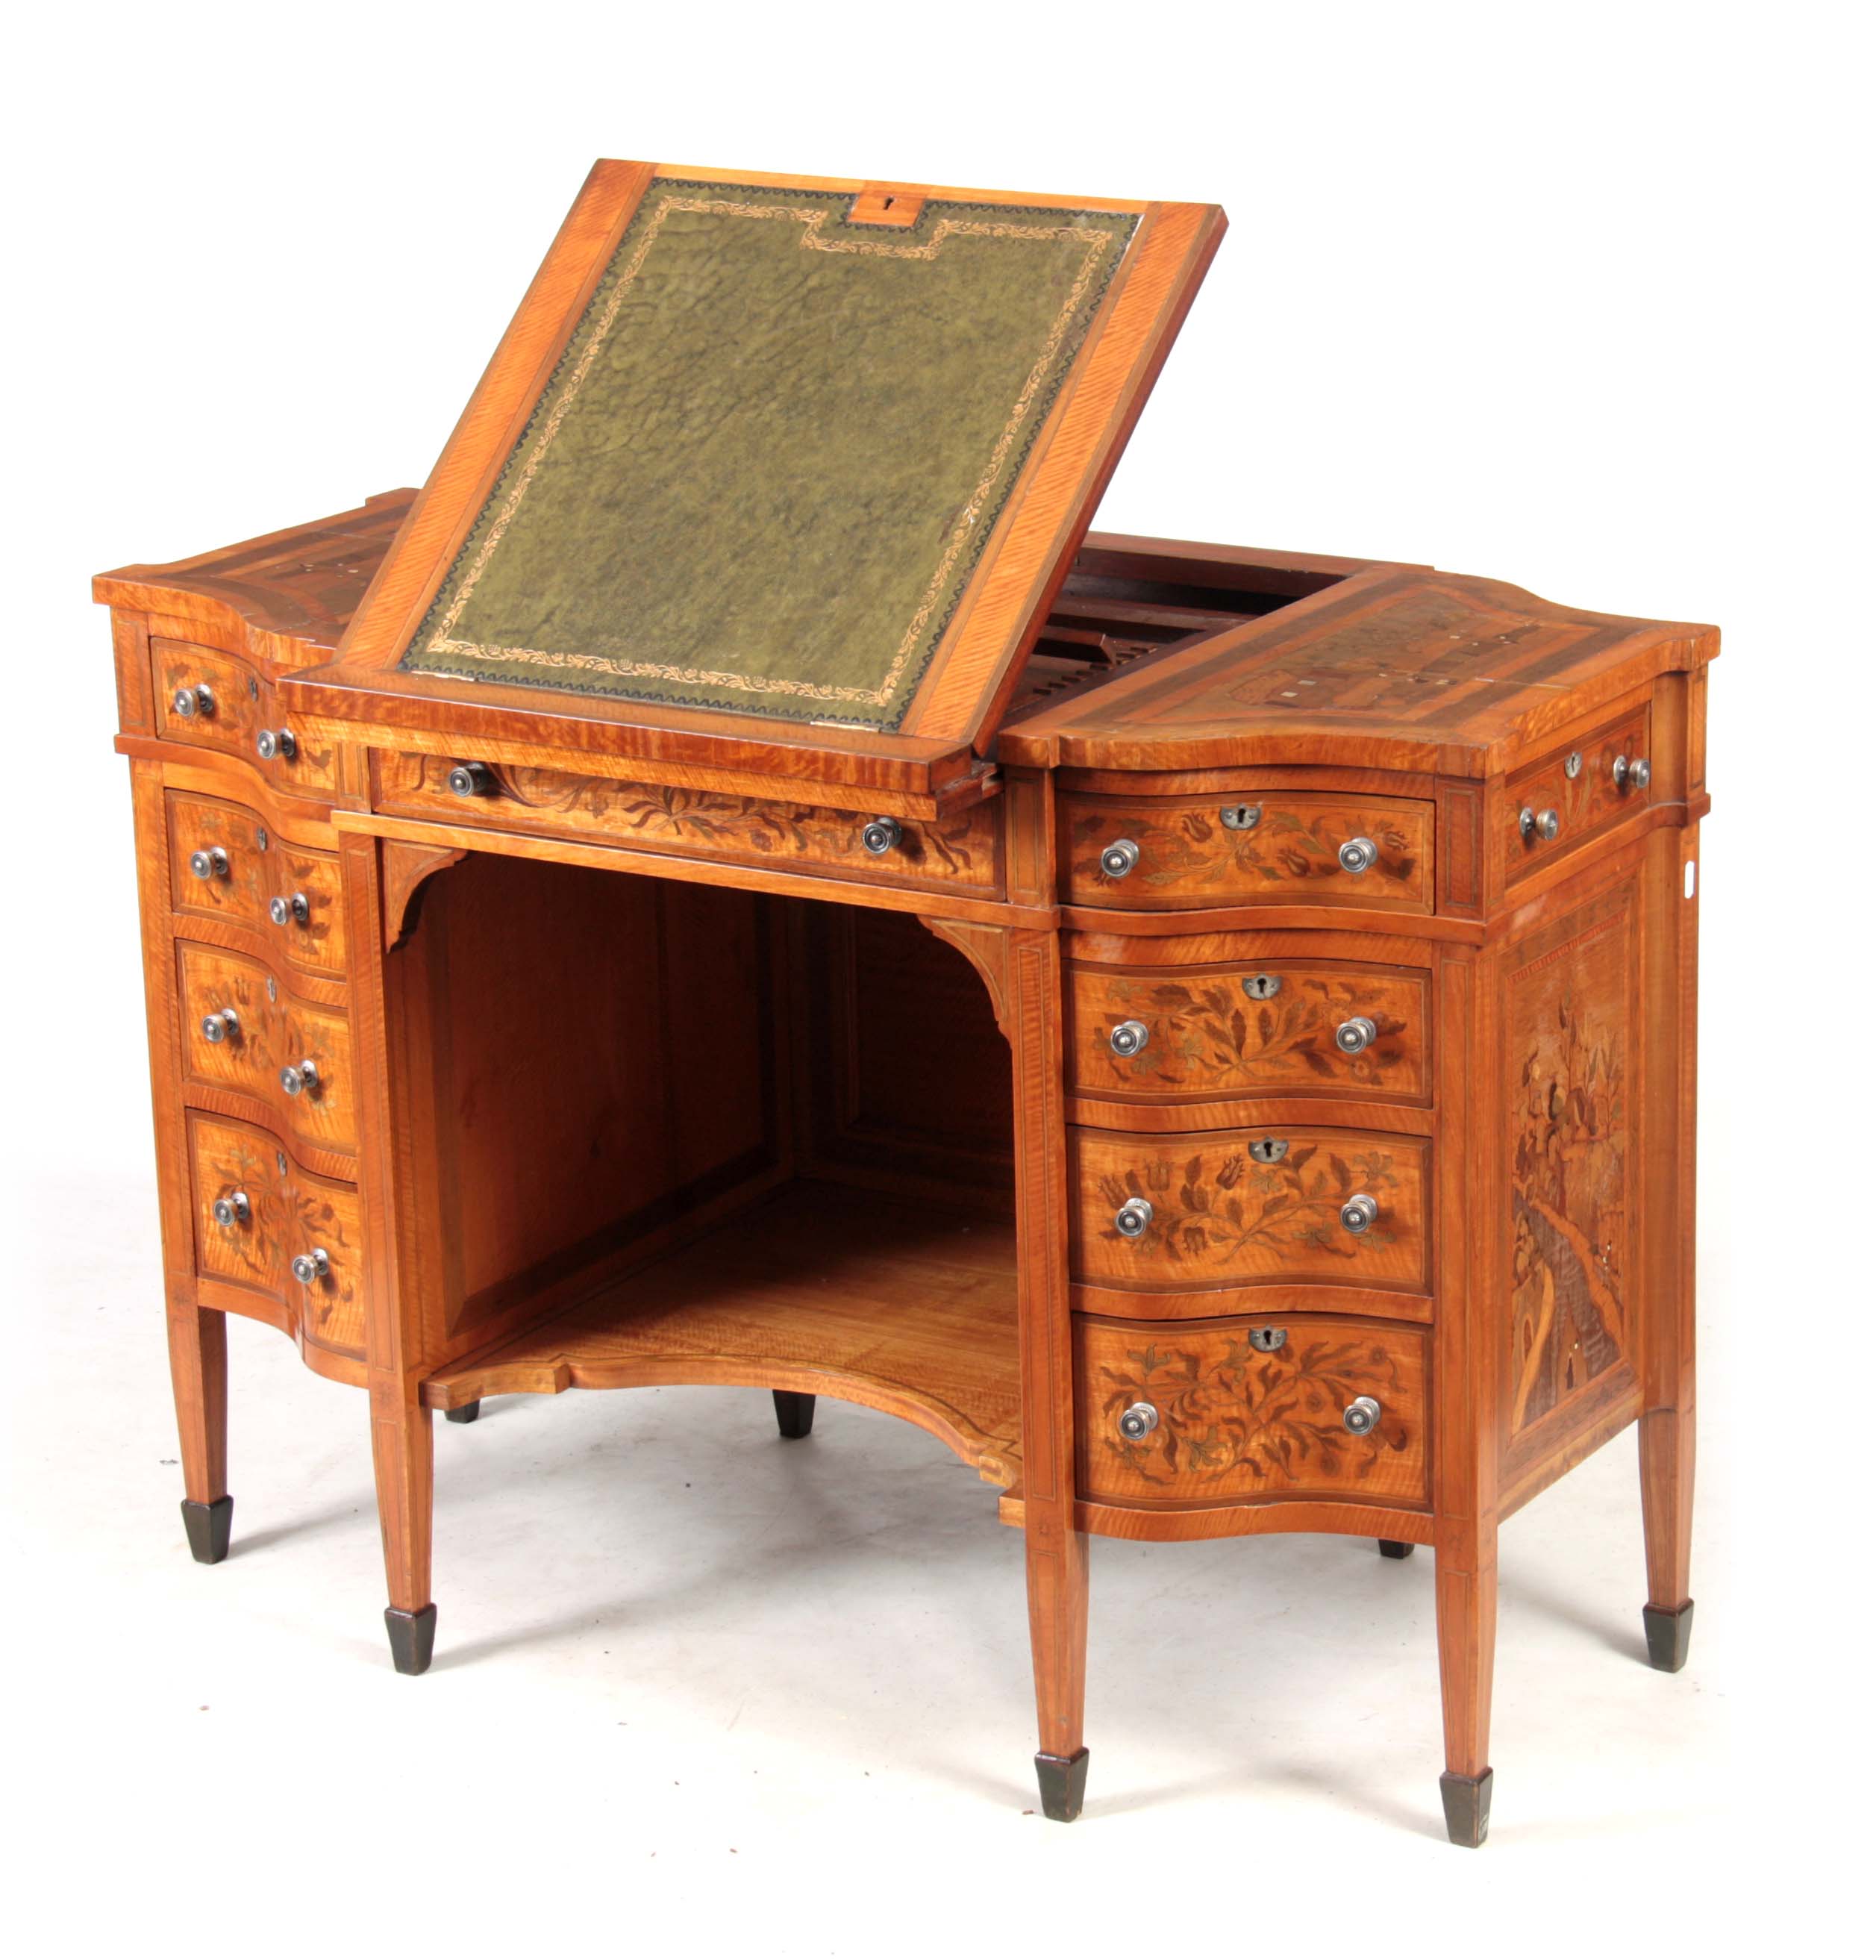 AN UNUSUAL FREESTANDING VICTORIAN SATINWOOD INLAID DESK with floral inlaid serpentine drawers to the - Image 5 of 8